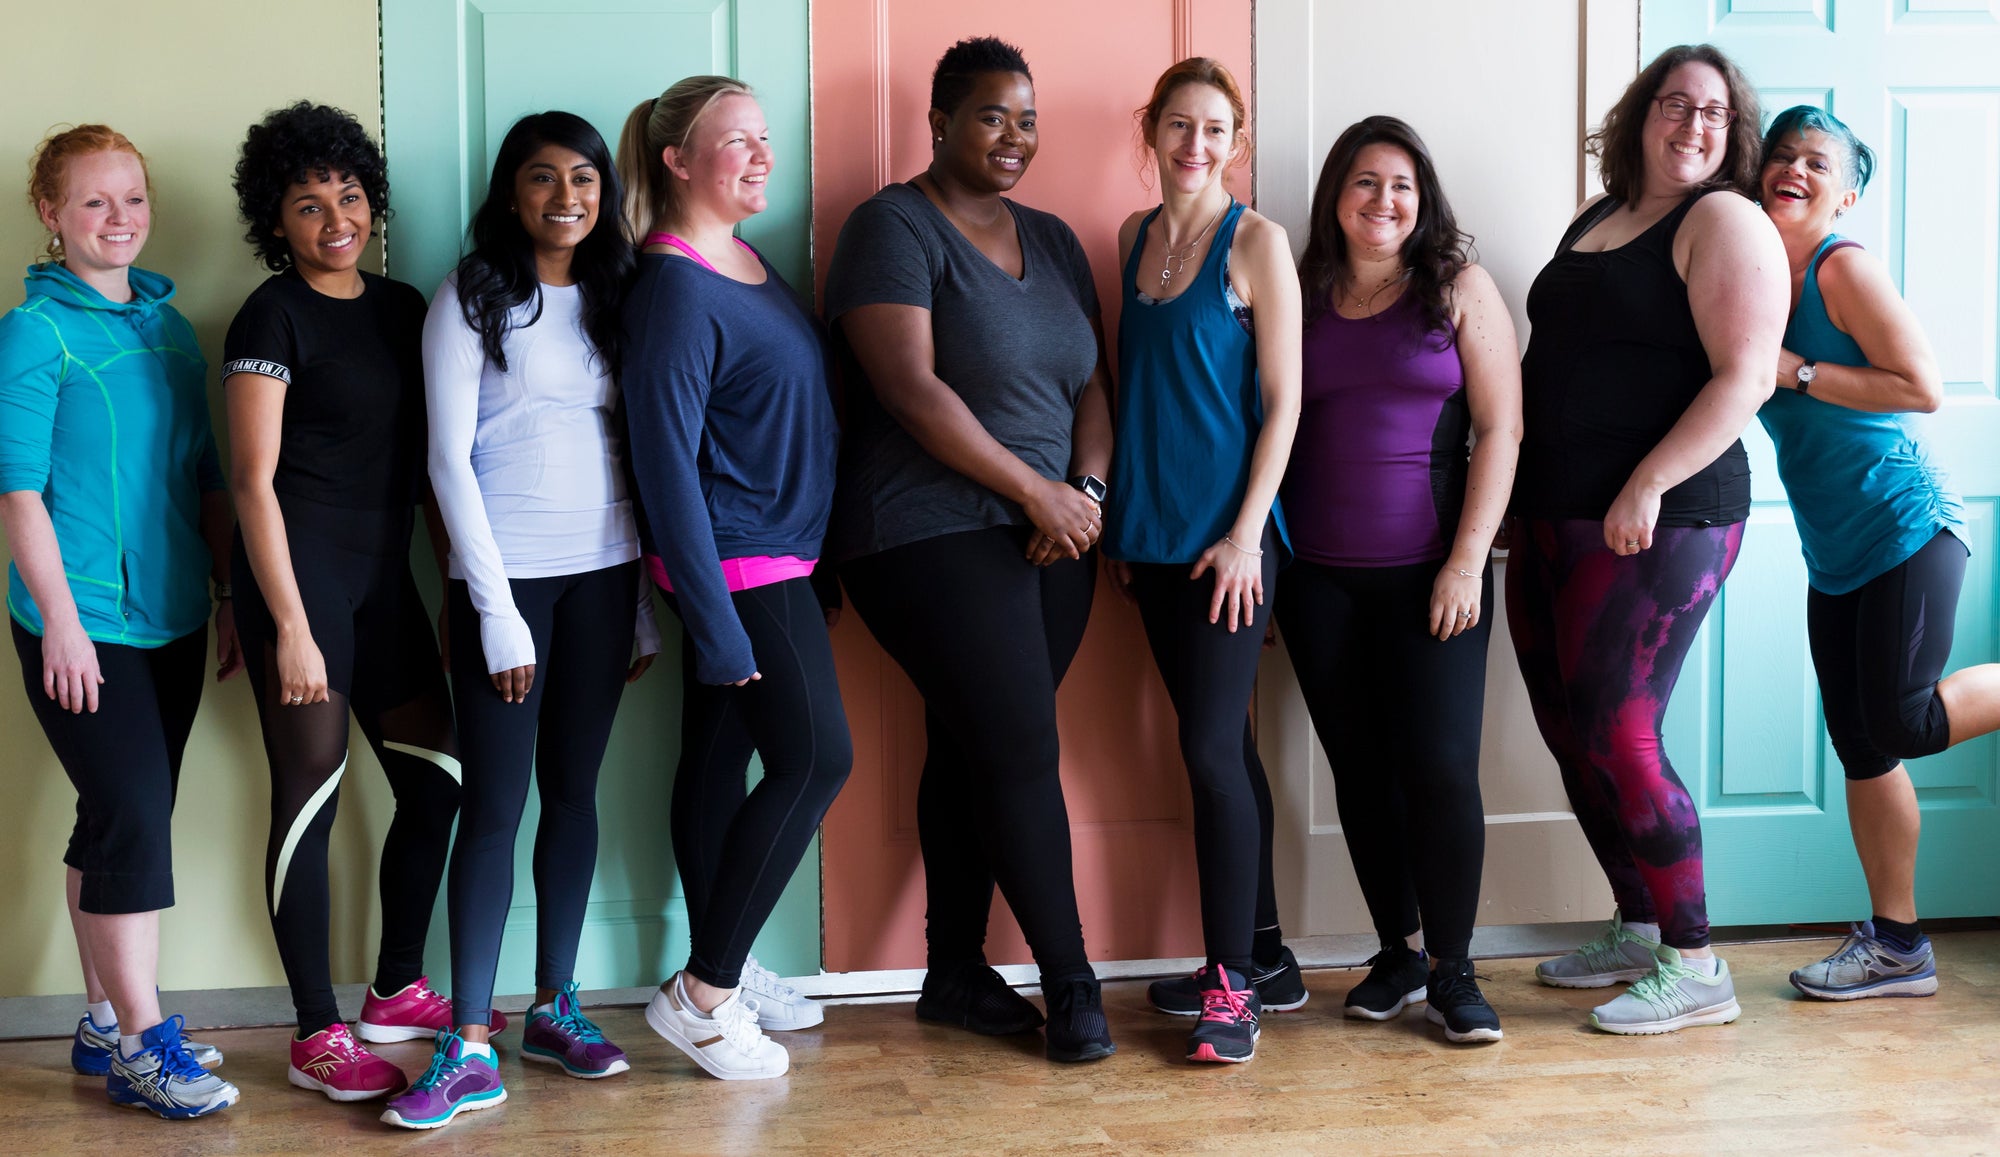 A group of women in fitness clothing all looking happy and cheerful